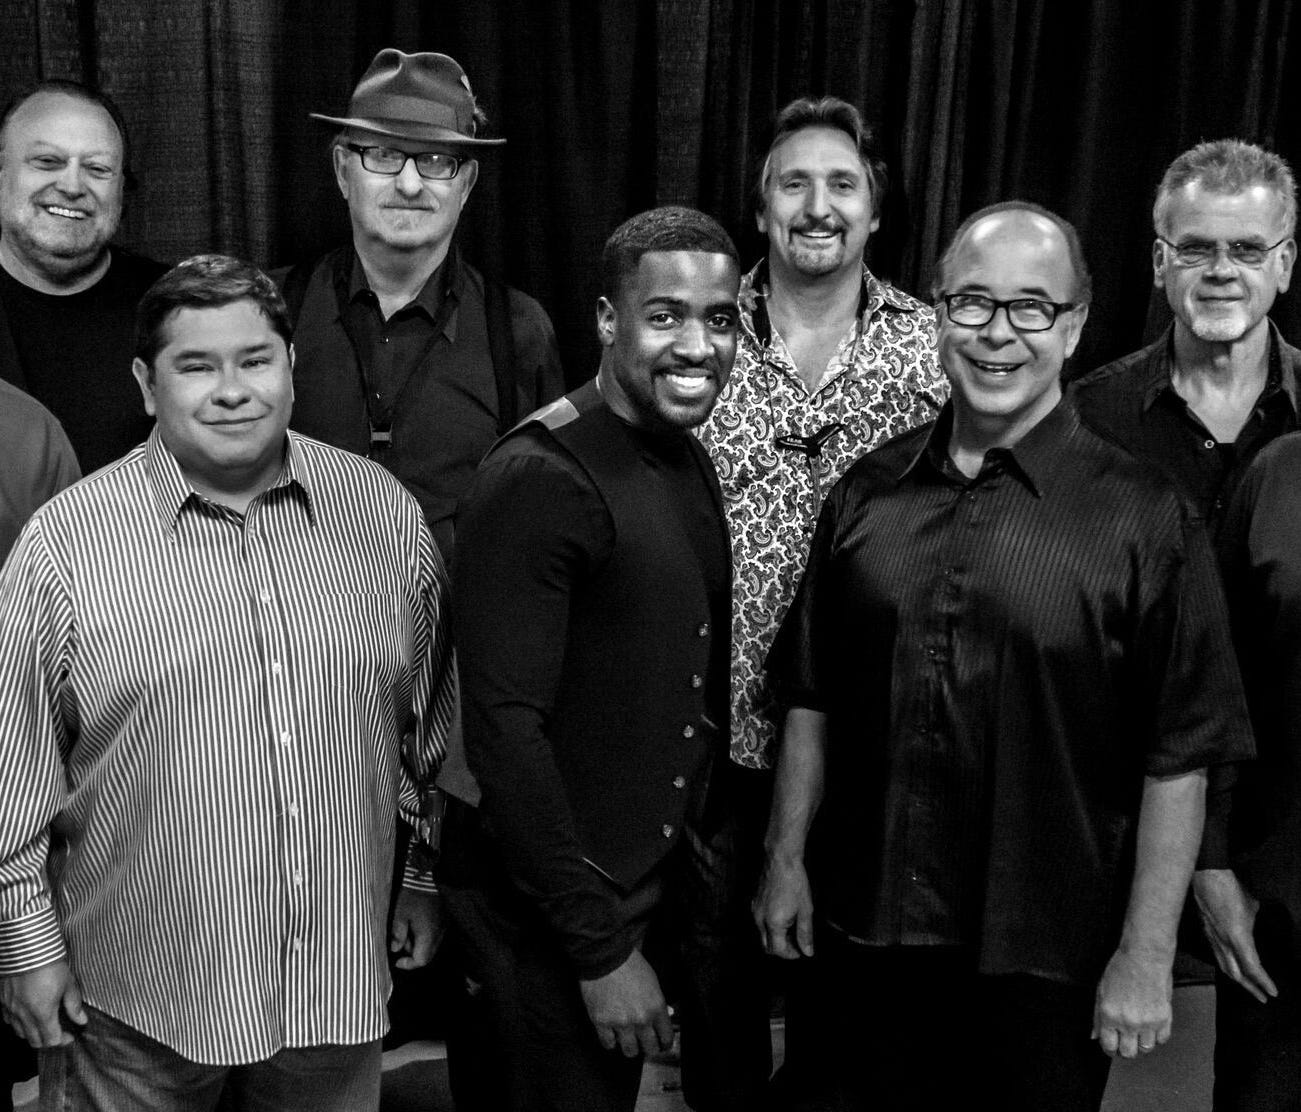 This Aug. 2016 photo provided by courtesy of Tower of Power/Webster Public Relations, shows the band members from Tower of Power, from left, Rocco Prestia, Roger Smith, Sal Cracchiolo, Adolfo Acosta, Stephen 